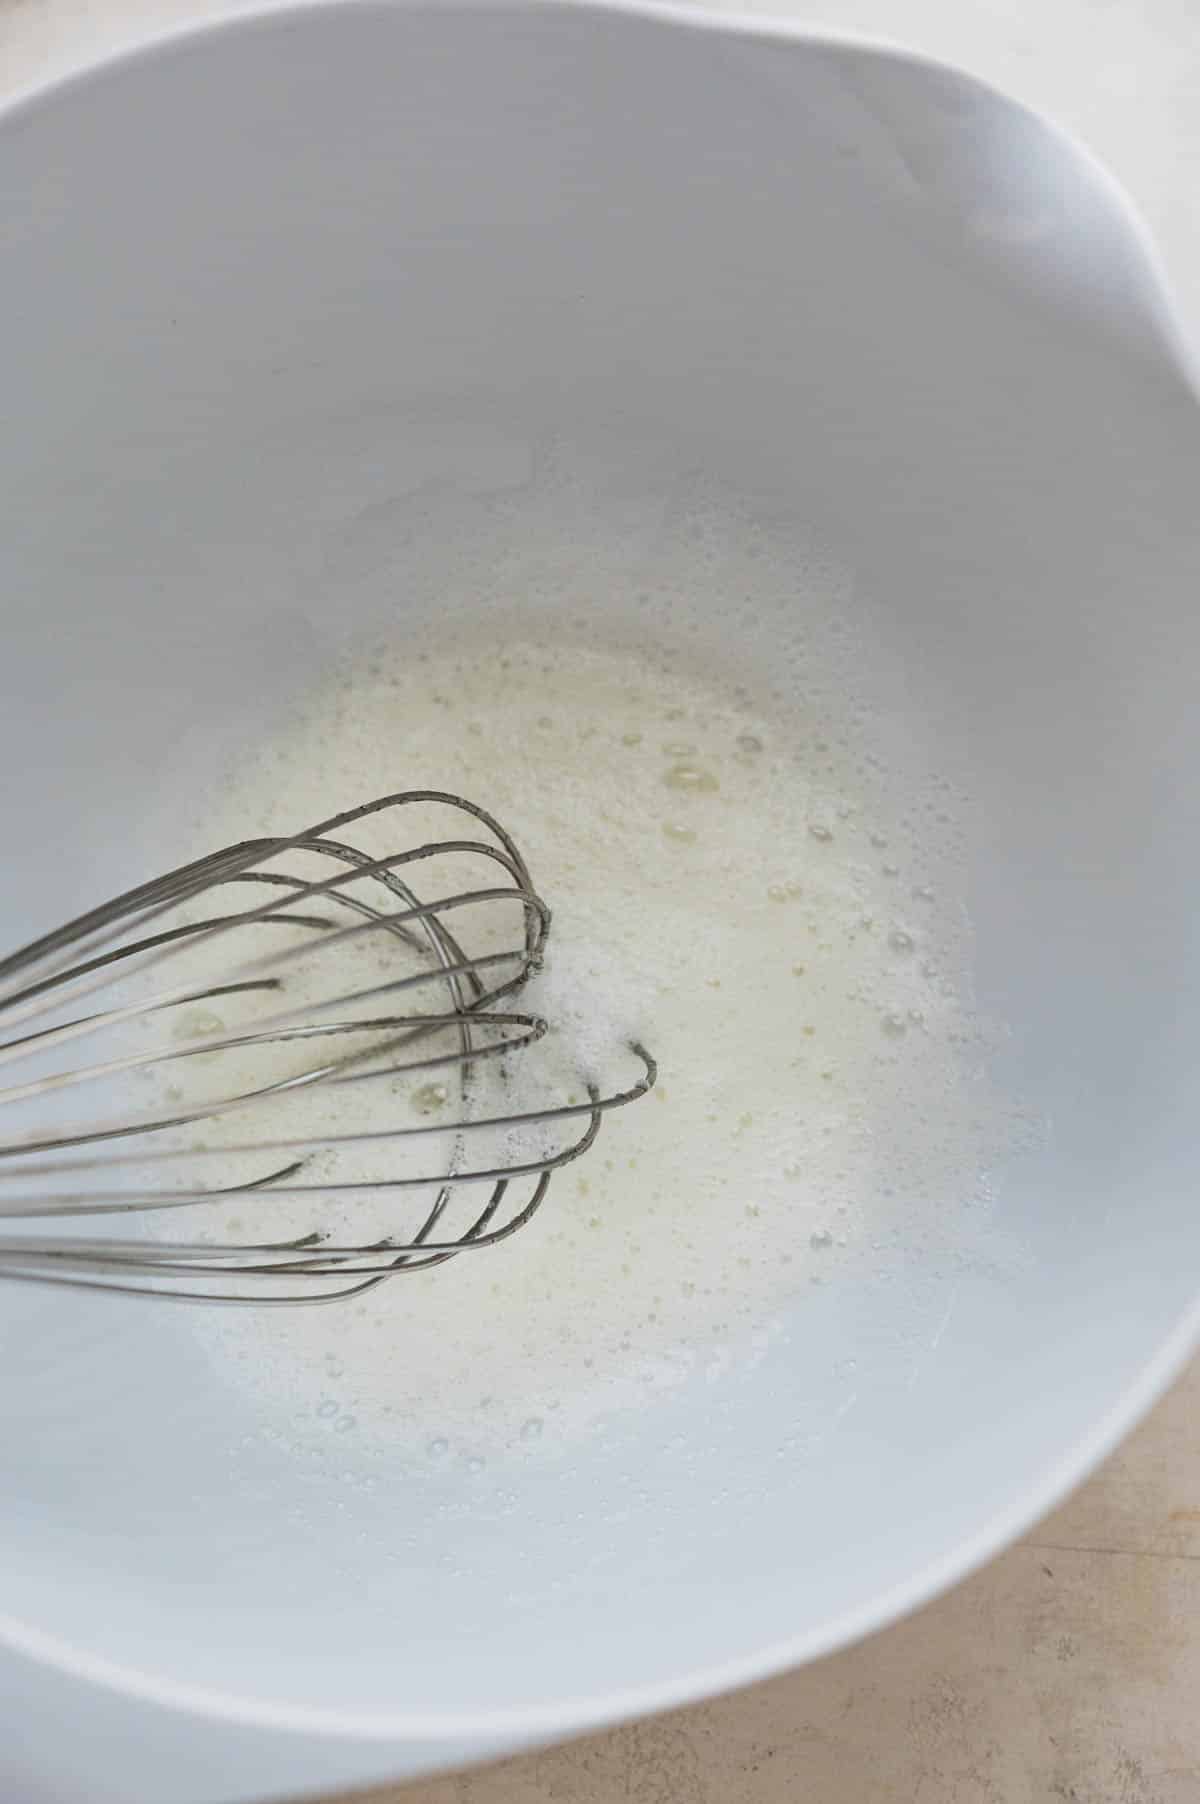 whisking the egg whites into frothy oblivion with a large whisk.